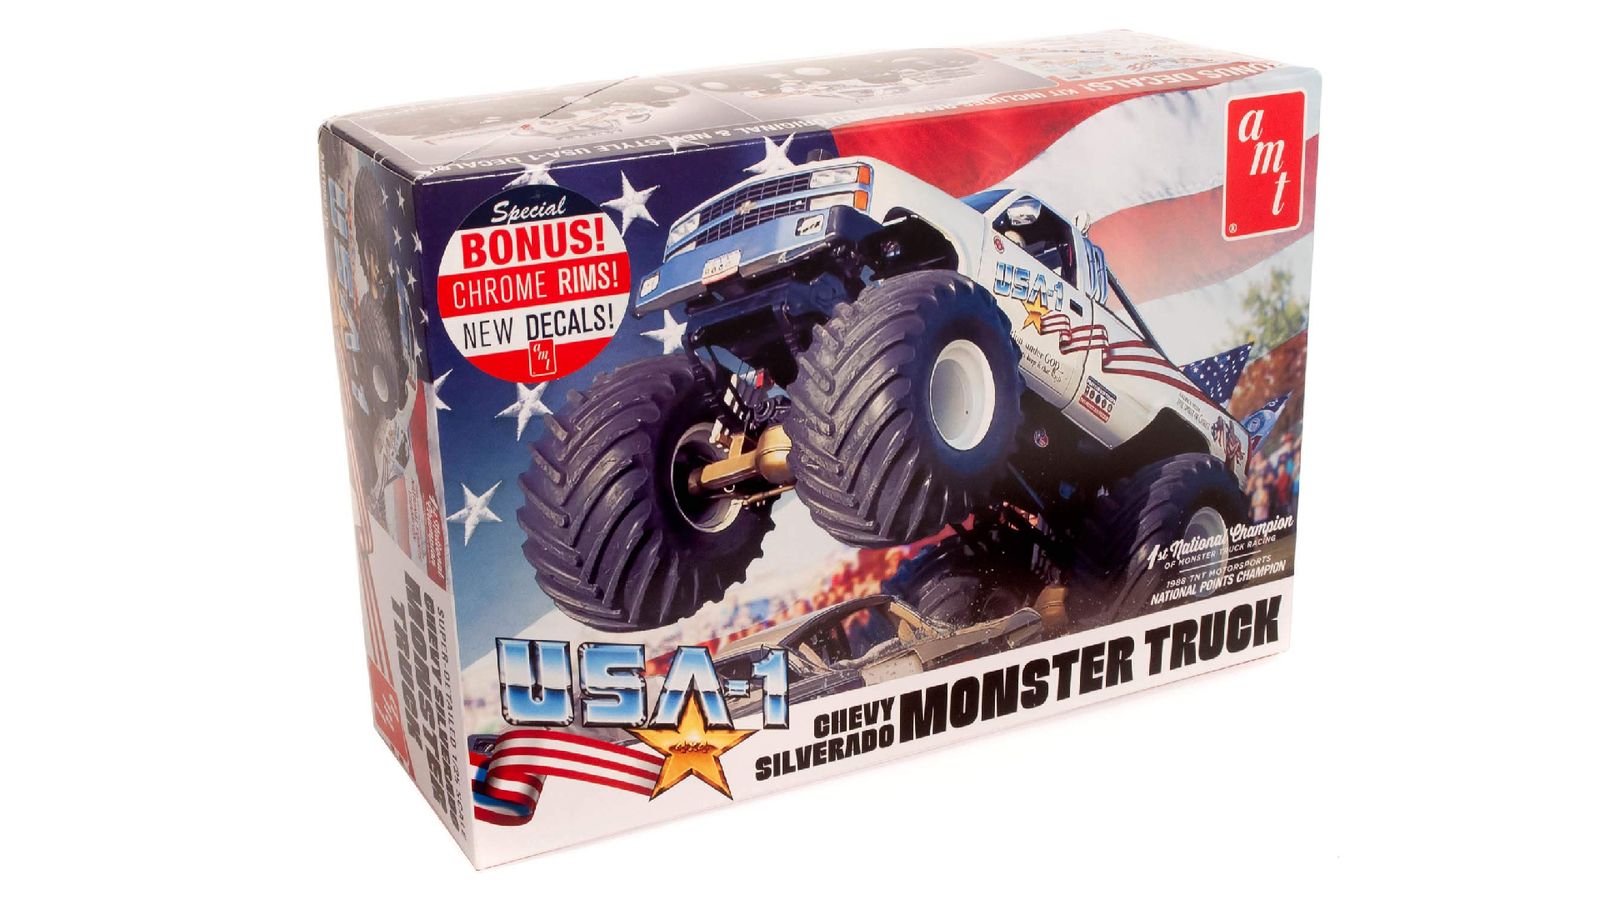 USA-1 Chevy Silverado Monster Truck product image of a white monster truck featuring American flags as decals.